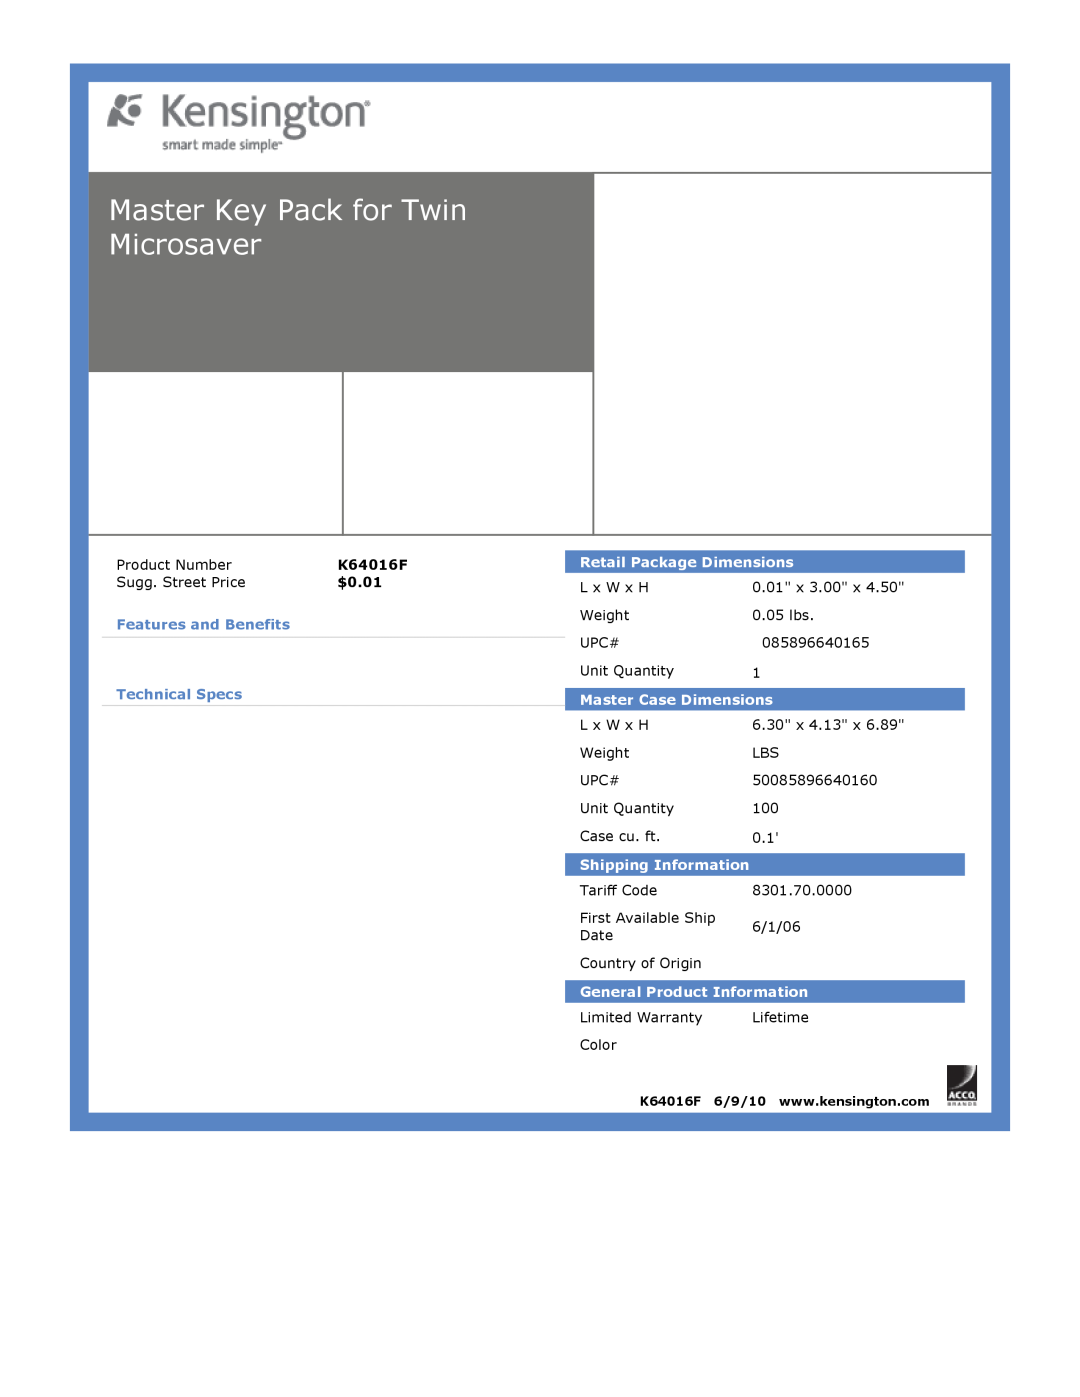 Kensington EU64325 dimensions Master Key Pack for Twin Microsaver, $0.01, Features and Benefits Technical Specs 